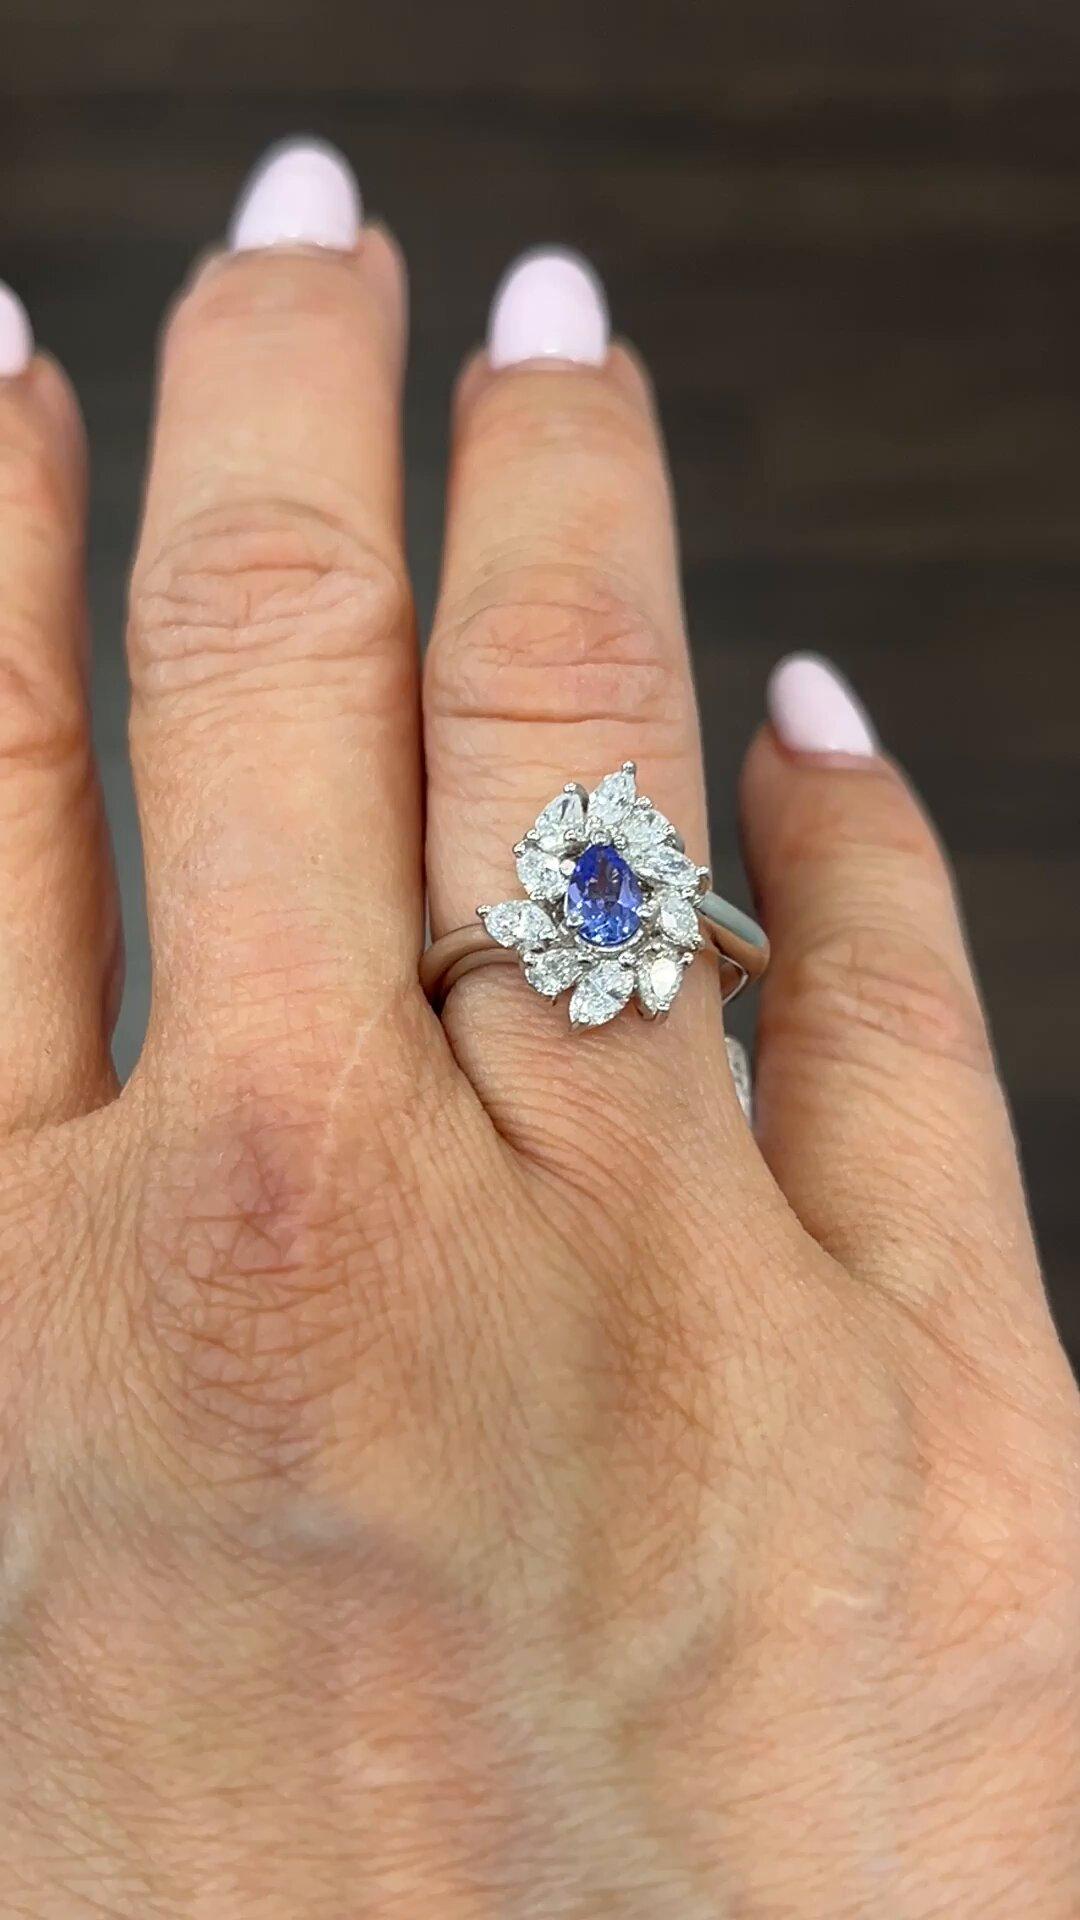 This exquisite ring features a stunning pear-shaped tanzanite stone complemented by sparkling diamonds. Set in platinum, this ring exudes luxury and elegance. The vibrant blue color of the tanzanite and diamonds brings a touch of sophistication to